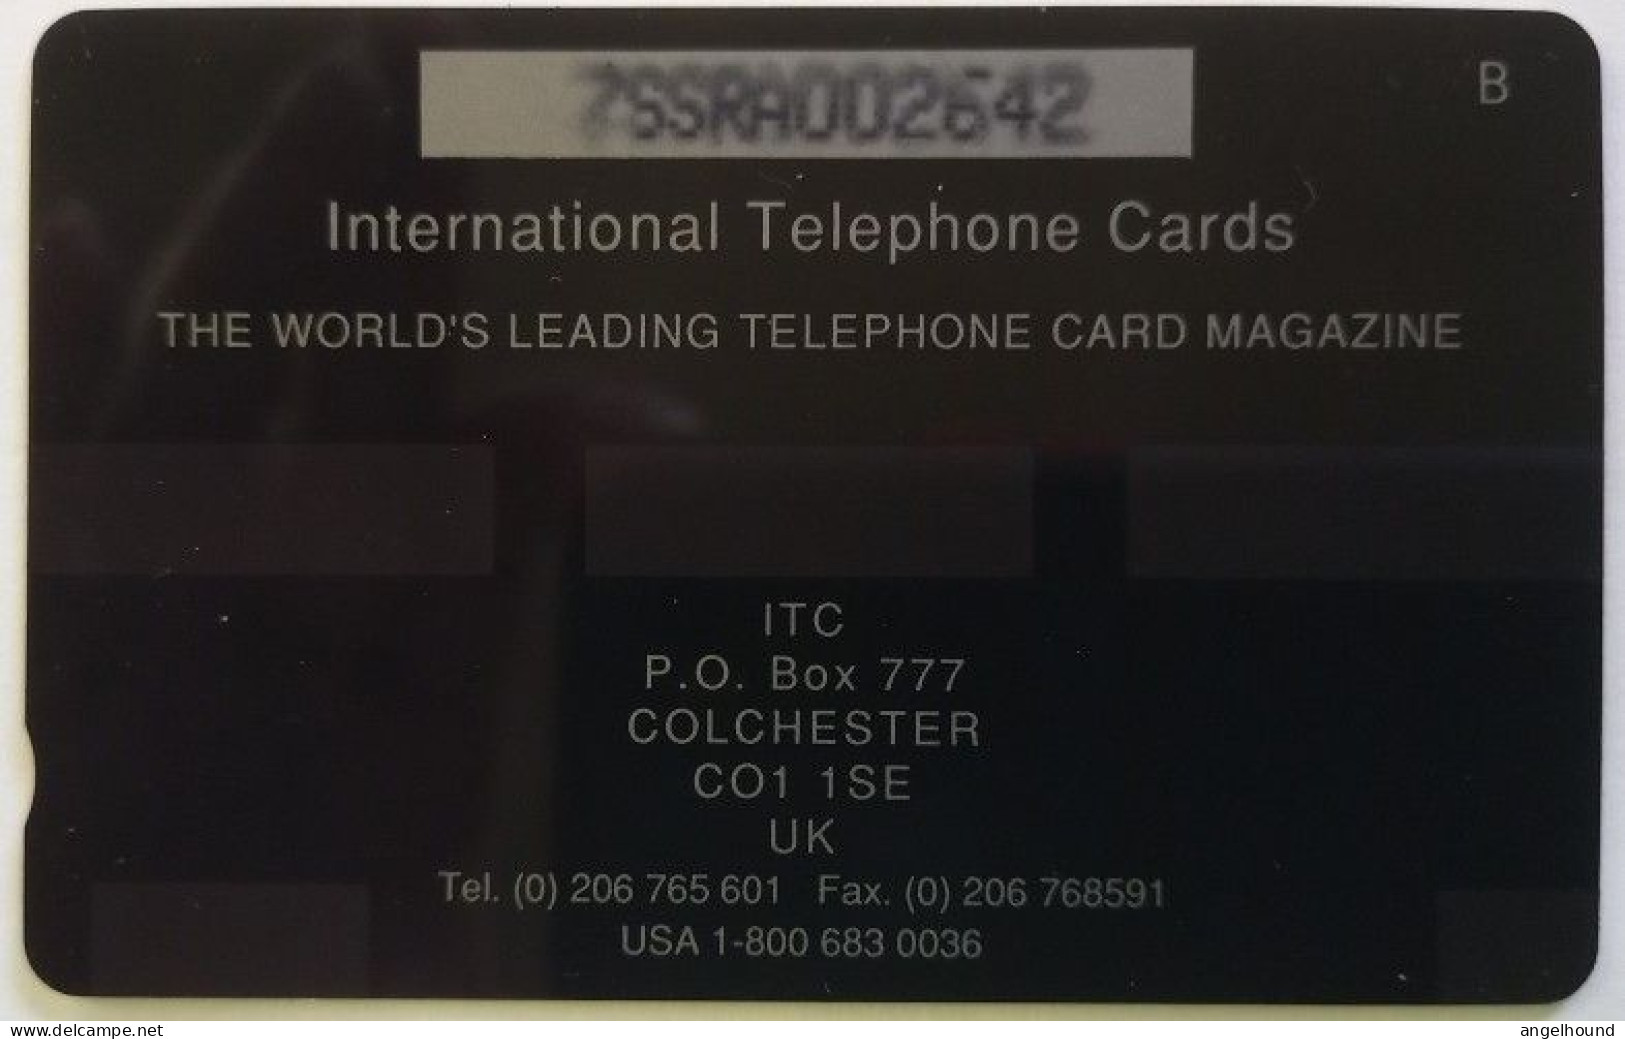 Russia Comstar $12 MINT GPT 7SSRA - International Telephone Cards Magazine - Russie